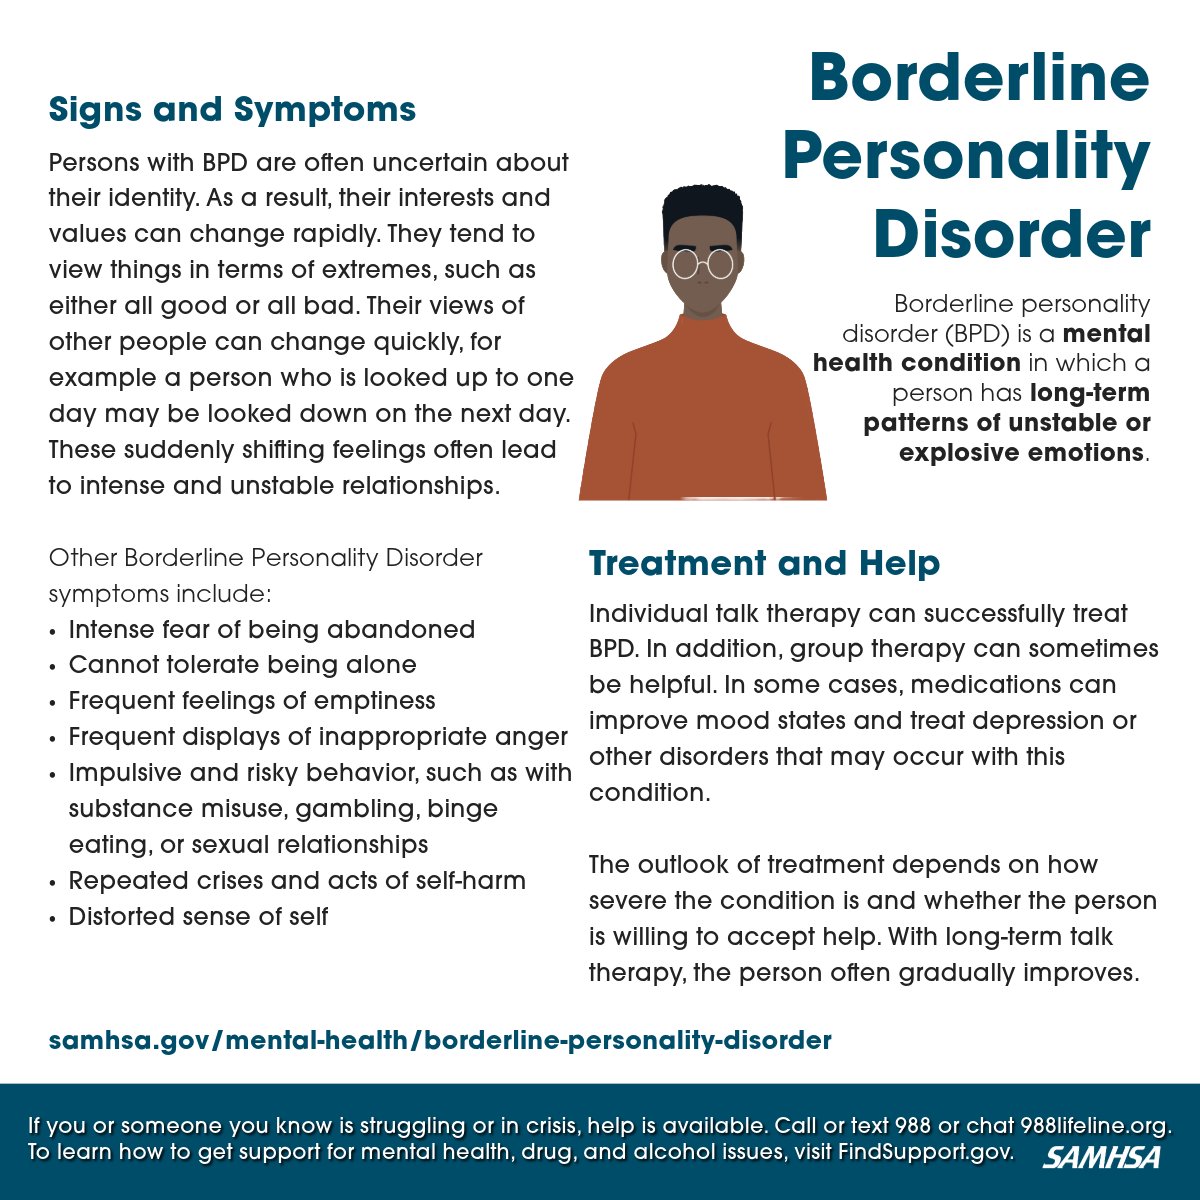 Borderline personality disorder (BPD) is a mental health condition that severely impacts a person’s ability to regulate their emotions. Learn the signs & symptoms of BPD and how to find help for yourself, a friend, or a family member: samhsa.gov/mental-health/… #MHAM2024